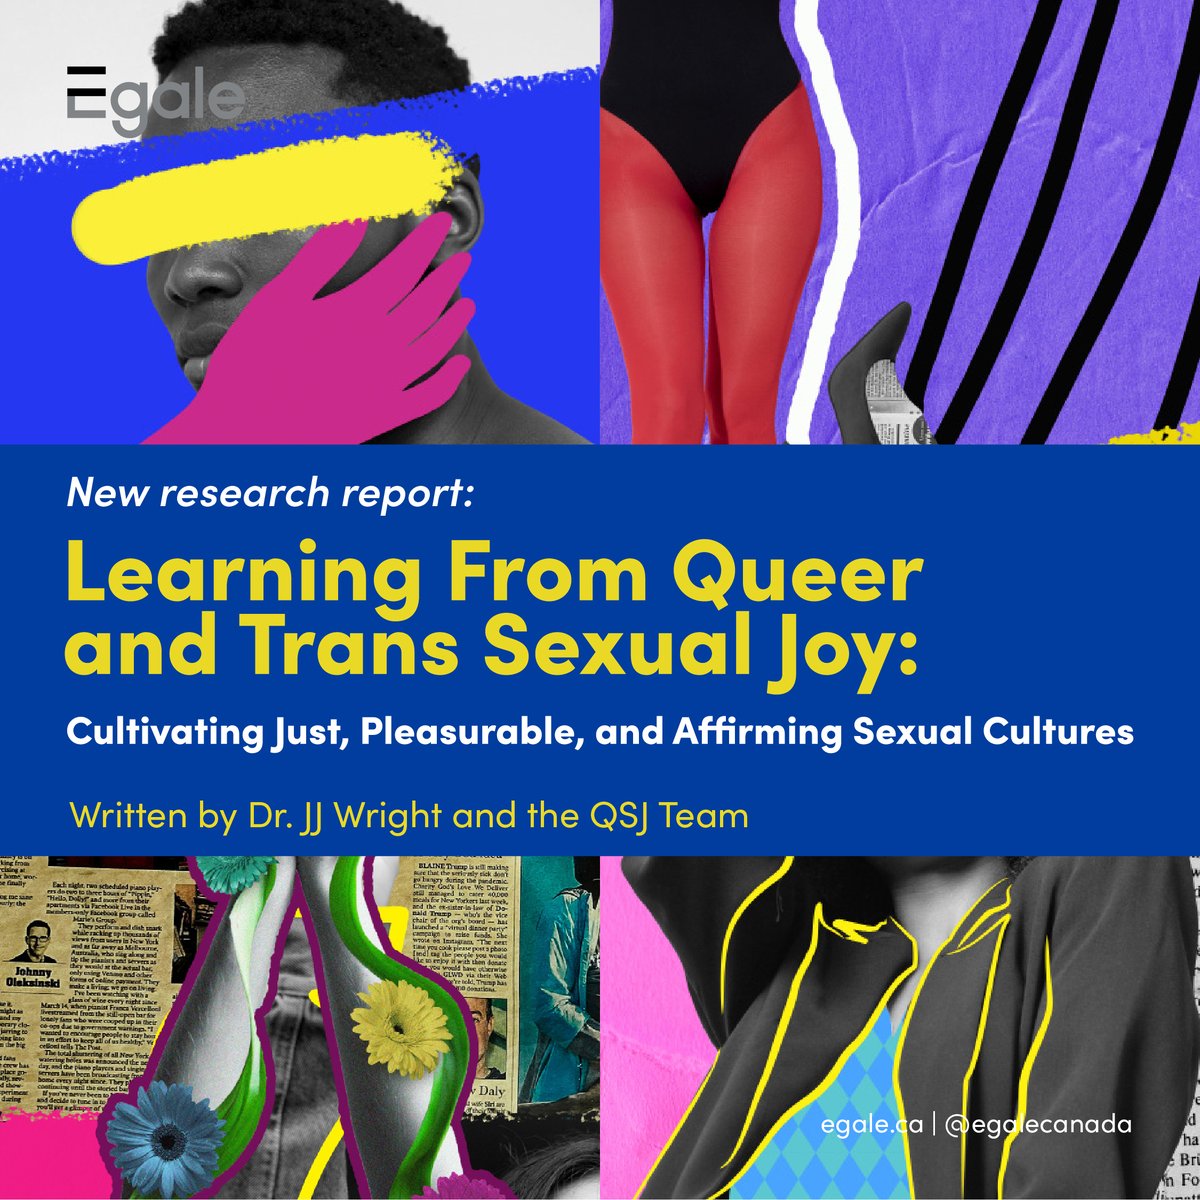 1/ ❗ NEW RESEARCH REPORT ❗ Learning From Queer and Trans Sexual Joy: Cultivating Just, Pleasurable, and Affirming Sexual Cultures, a report from a project led by Dr. JJ Wright (@JessicaW_Tweets) in collaboration with Egale Canada